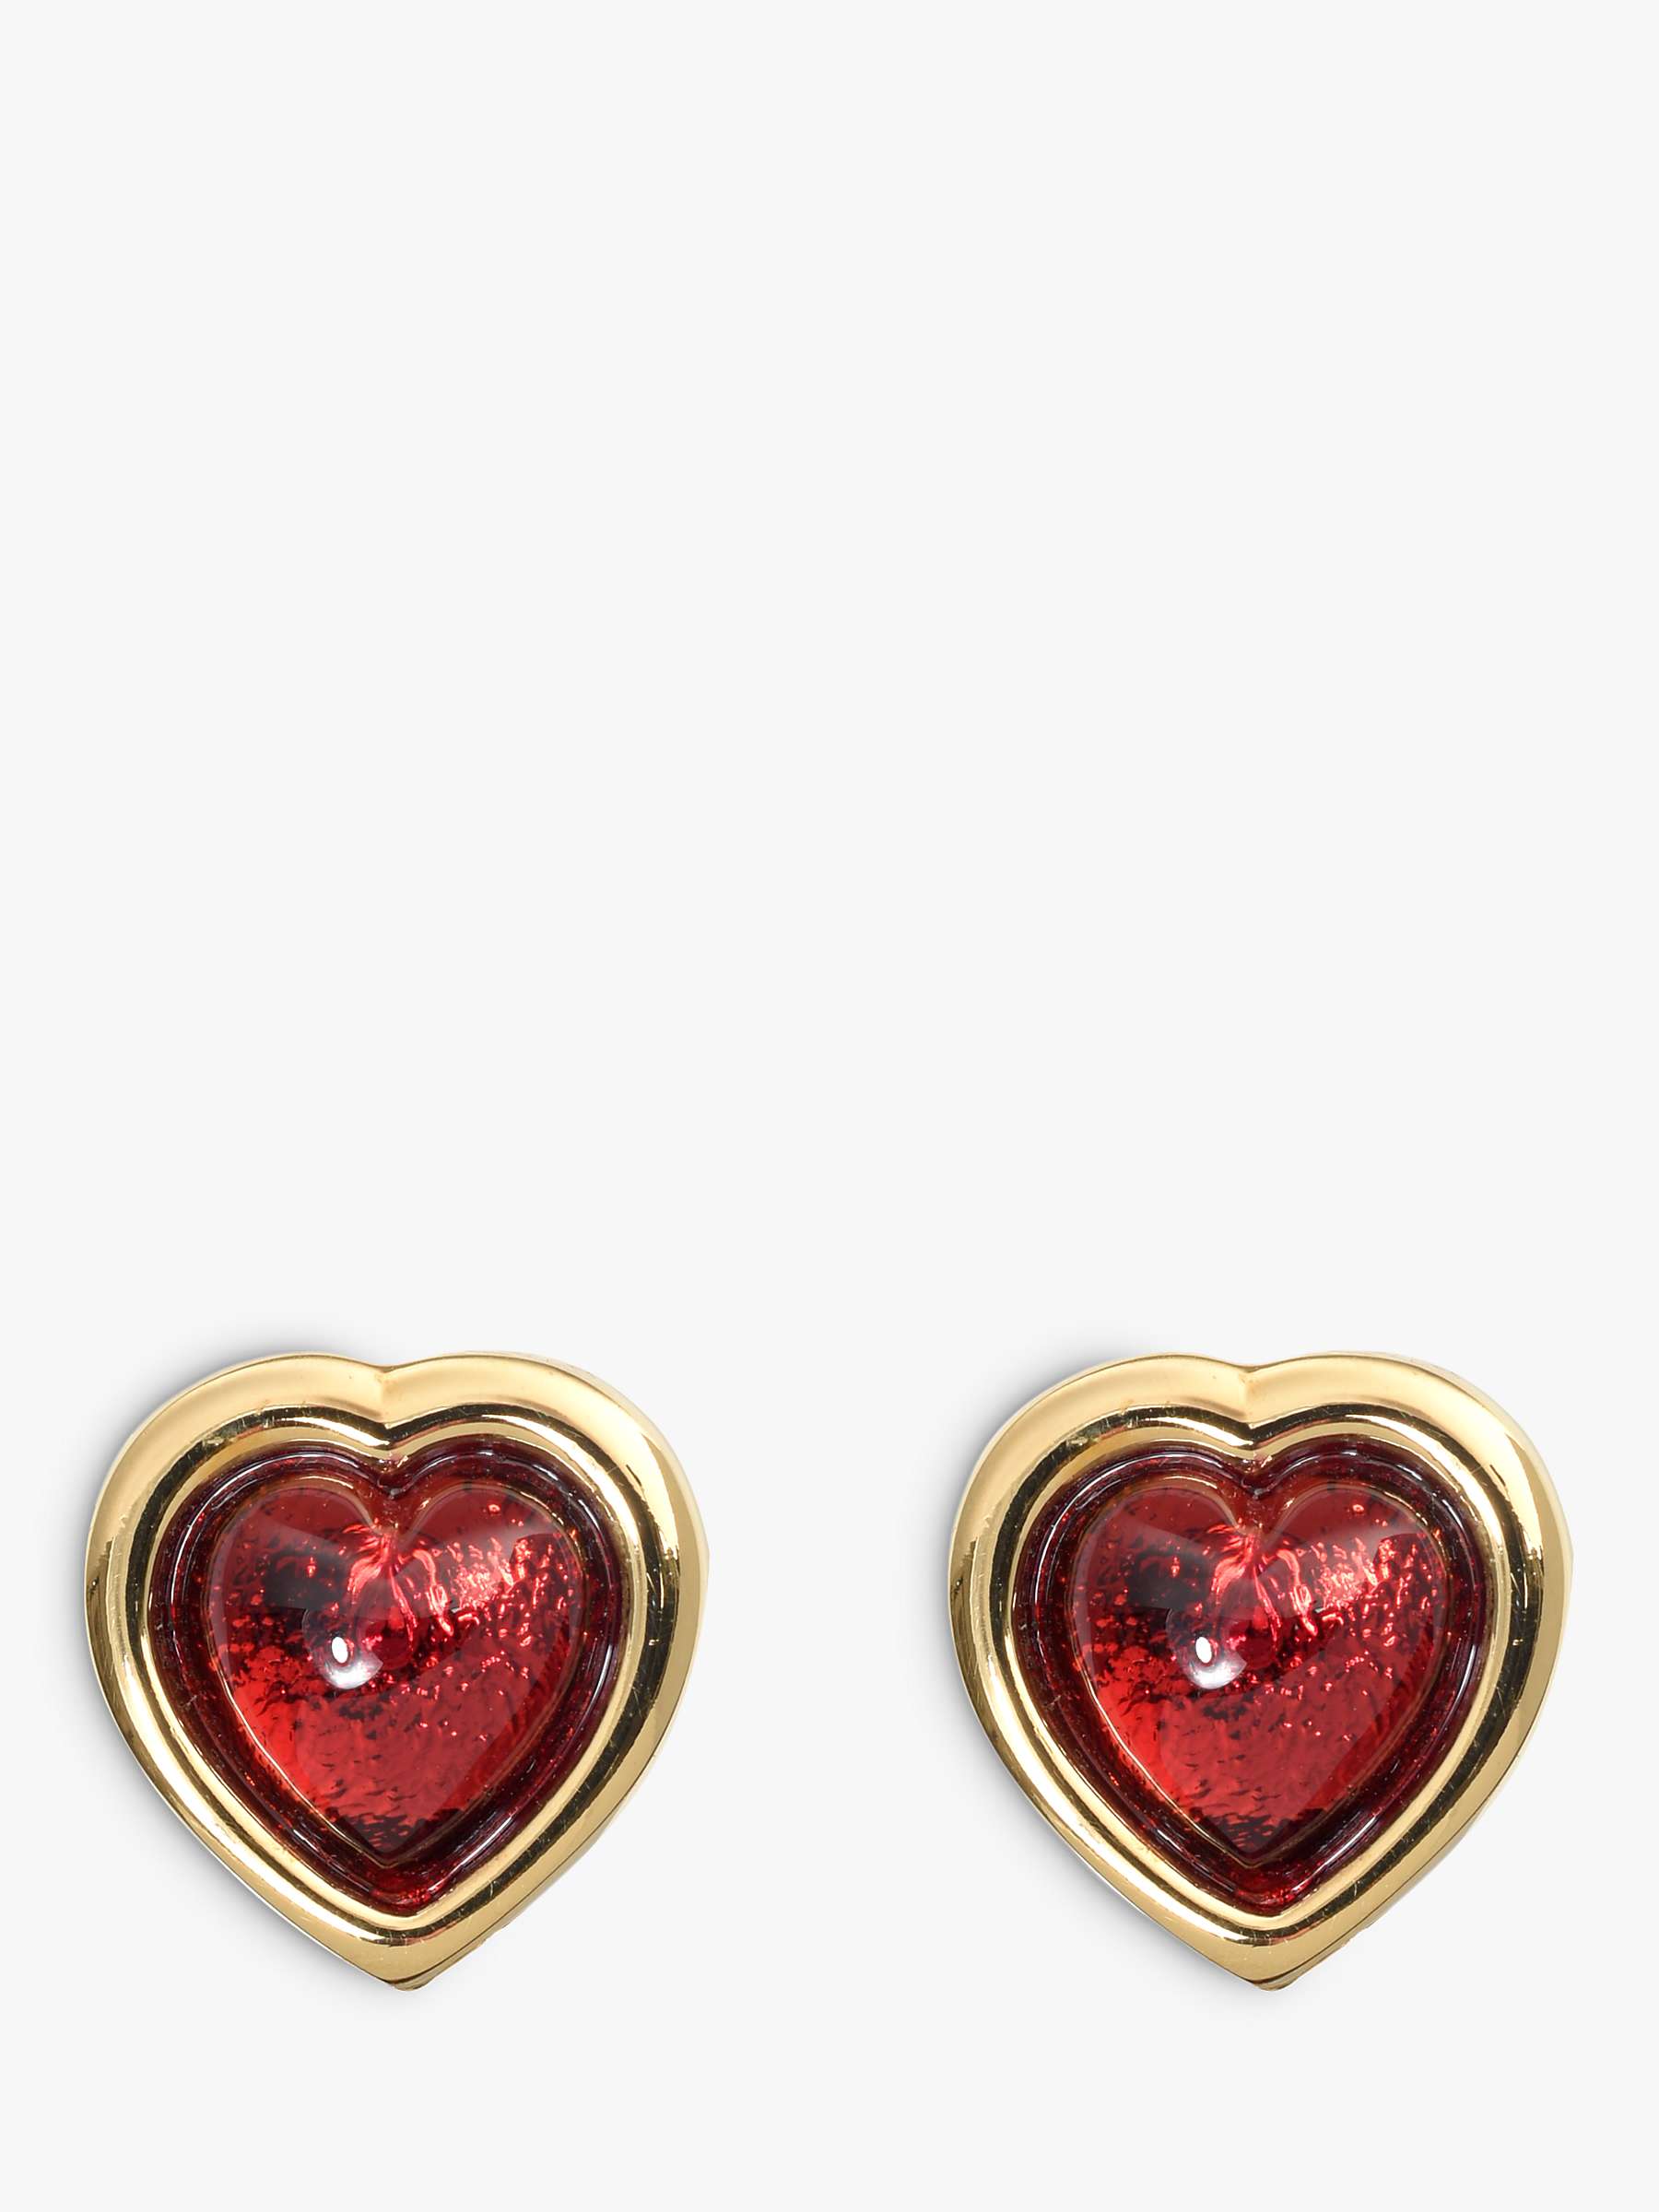 Buy Eclectica Vintage 22ct Gold Plated Heart Clip-On Earrings, Dated Circa 1980s Online at johnlewis.com